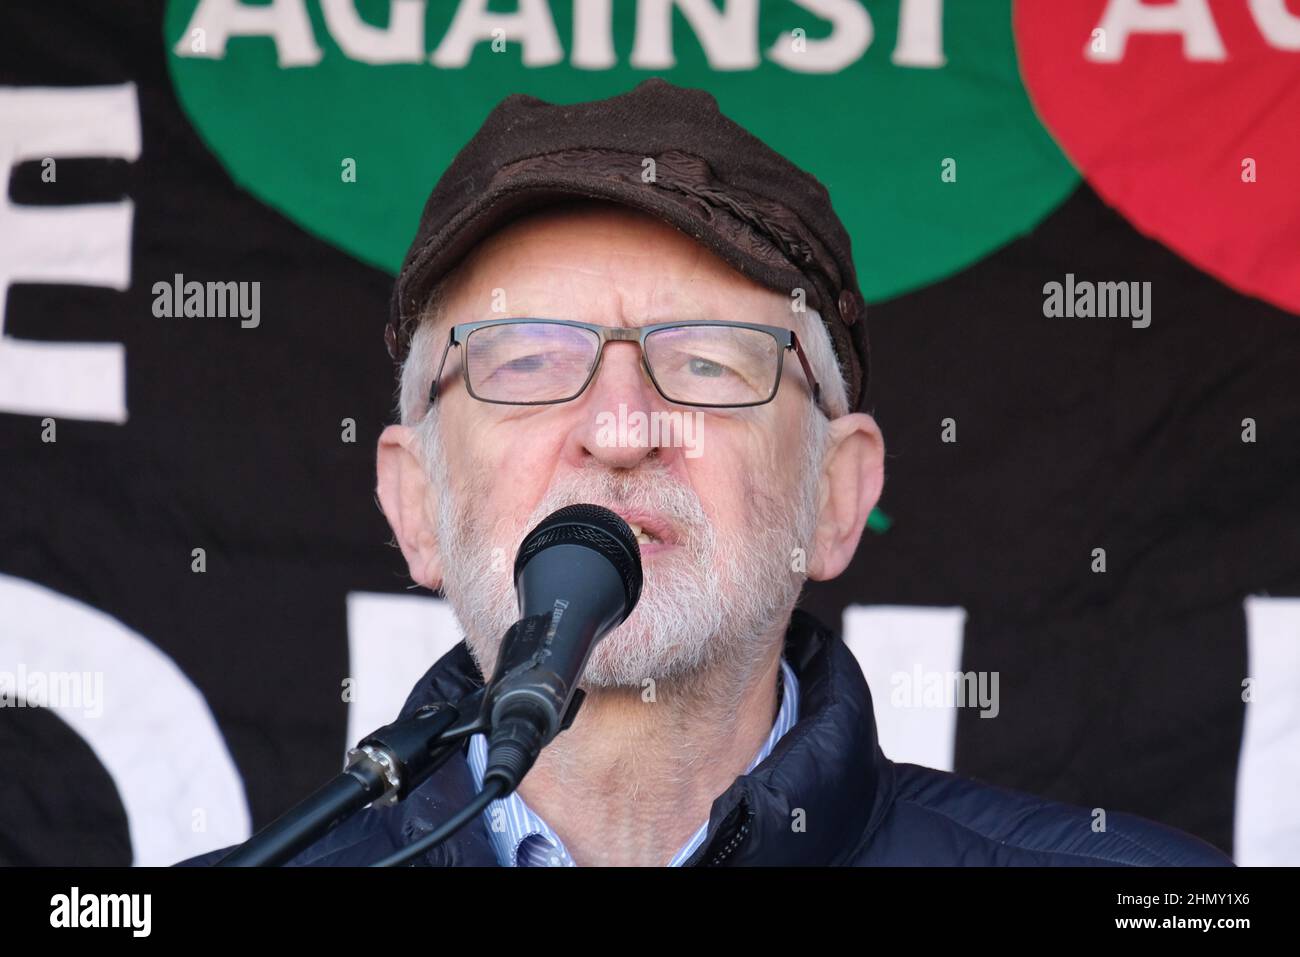 London, UK, 12th Feb, 2022. Former Labour leader Jeremy Corbyn addresses the crowd at a protest co-ordinated by anti-austerity group - The People's Assembly and trade unions held in Parliament Square, highlighting the cost of living crisis, as National Insurance contributions are set to increase in April and energy prices soar, plunging the poorest in society into poverty. Credit: Eleventh Hour Photography/Alamy Live News Stock Photo